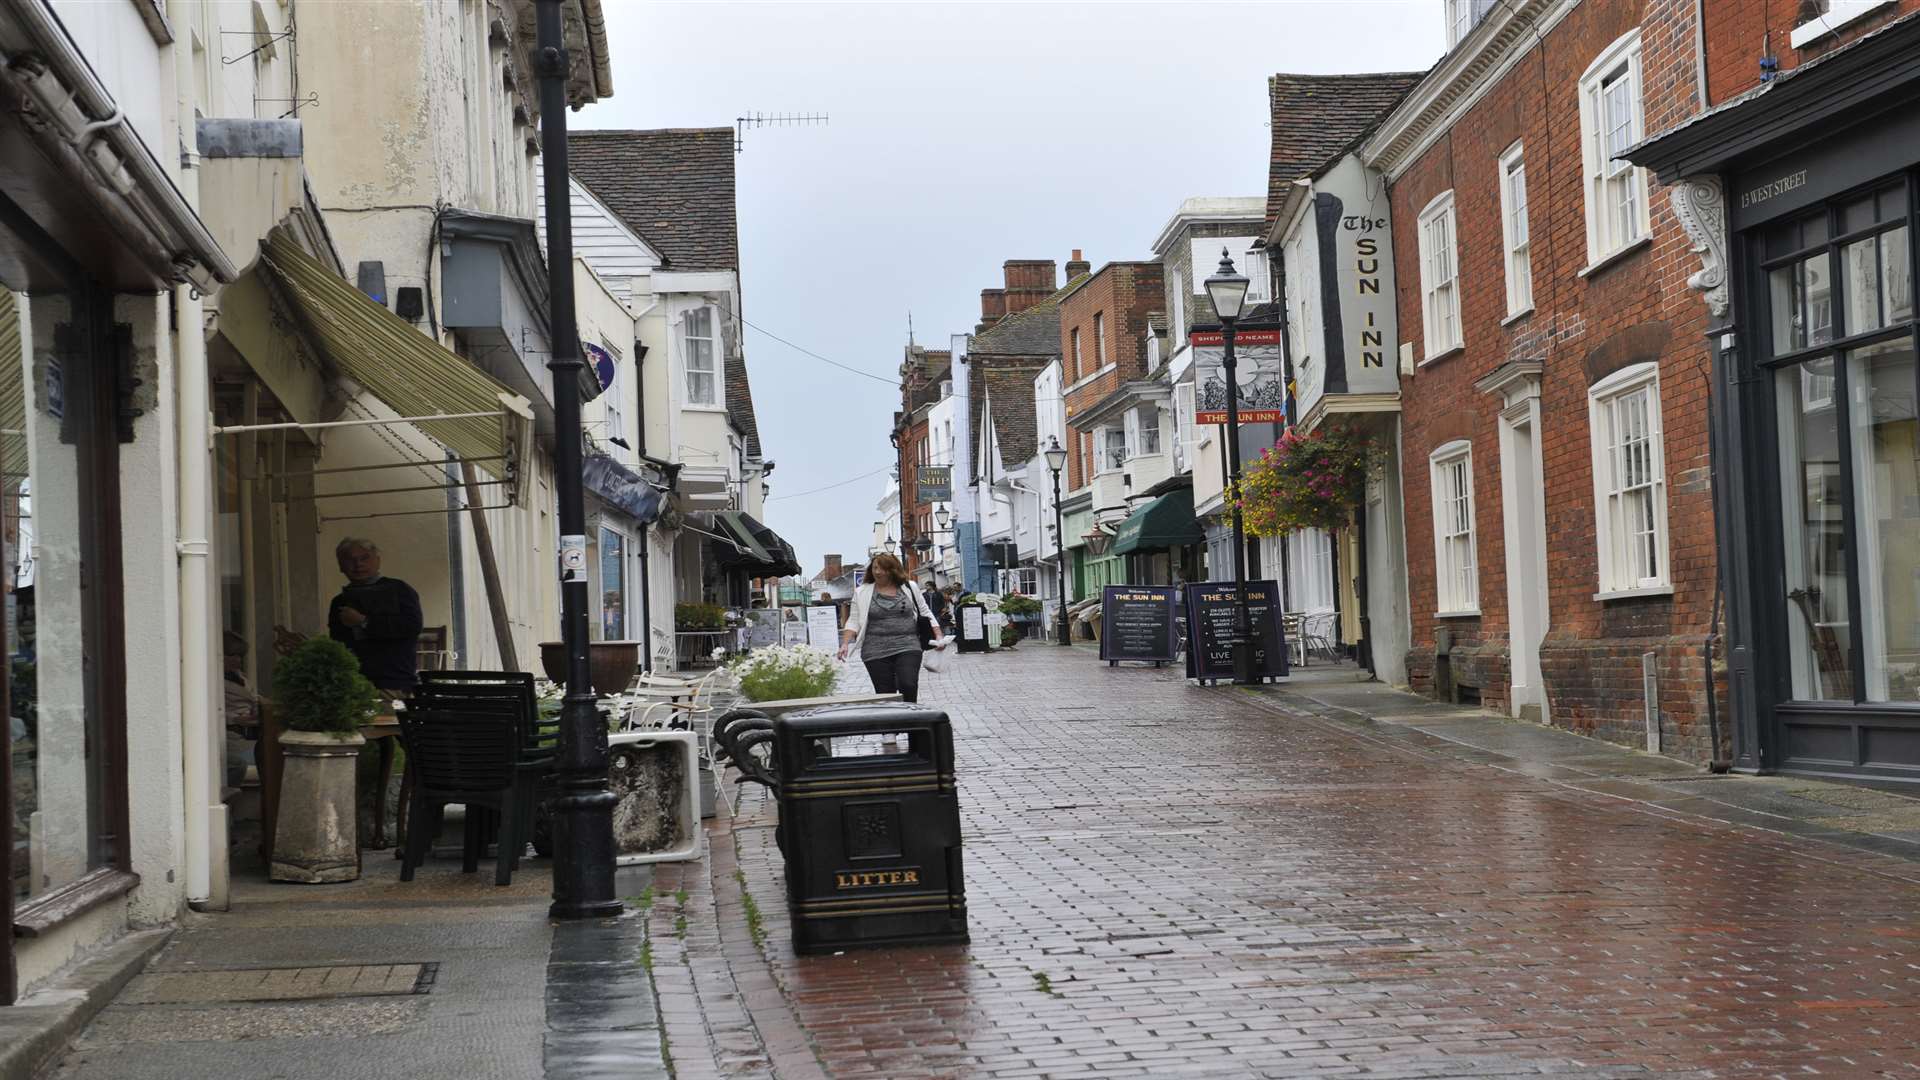 The smell has wafted over the town centre in Faversham